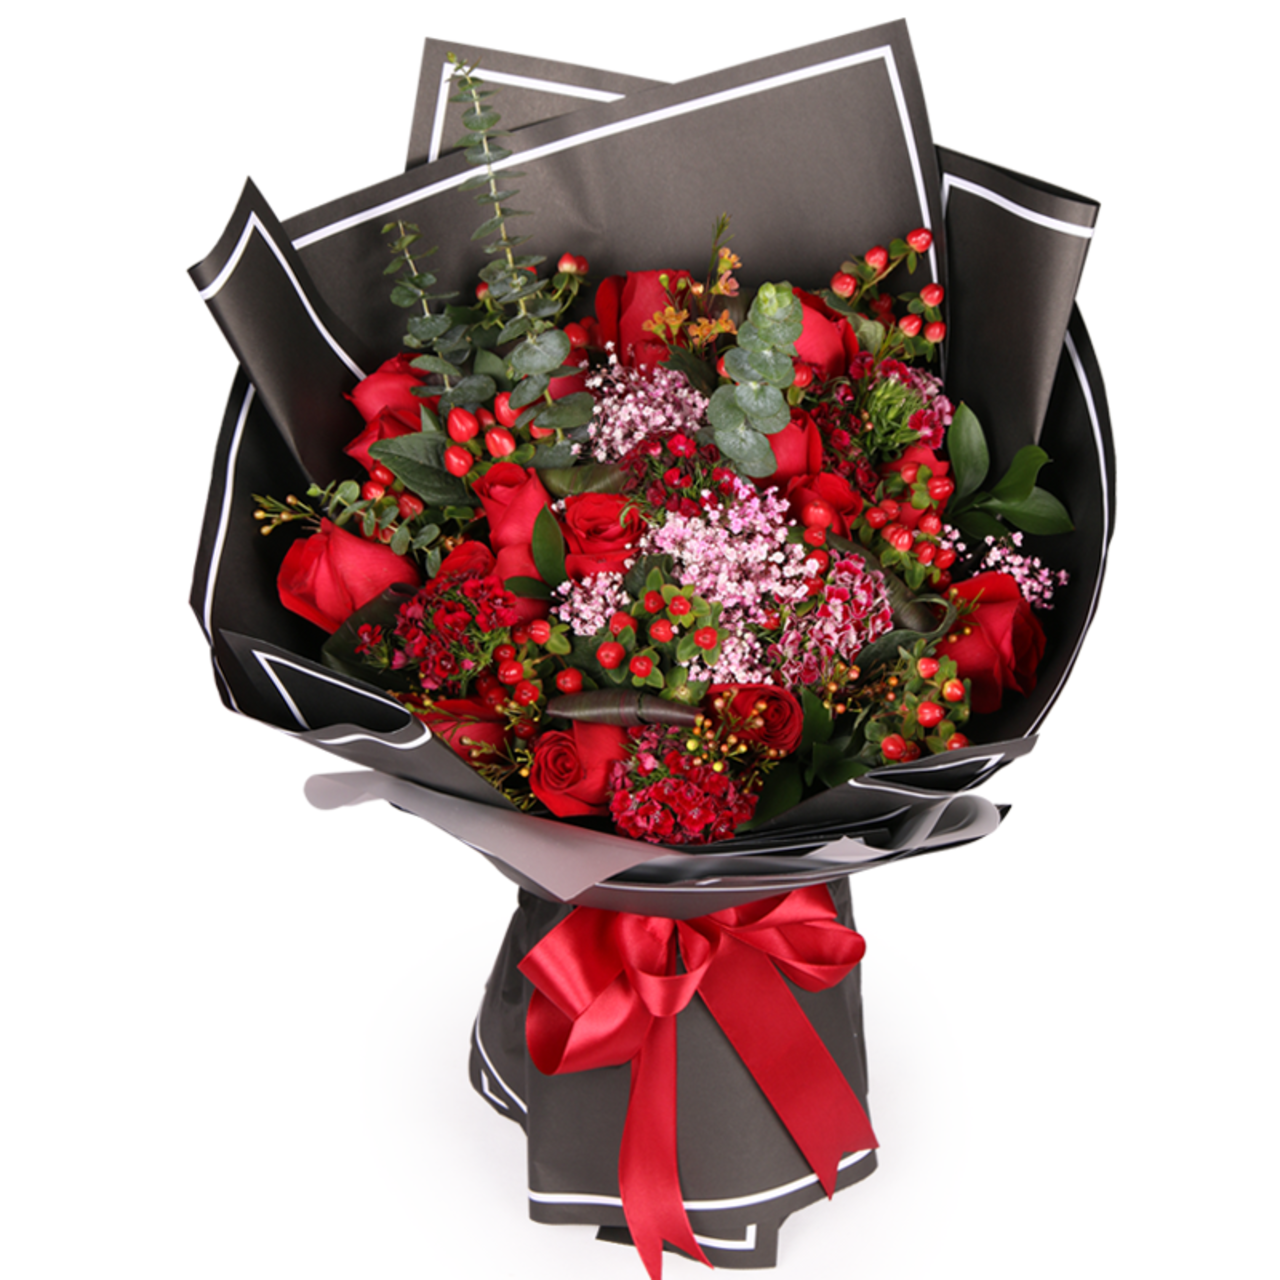 Deep love(
19 fine red roses)